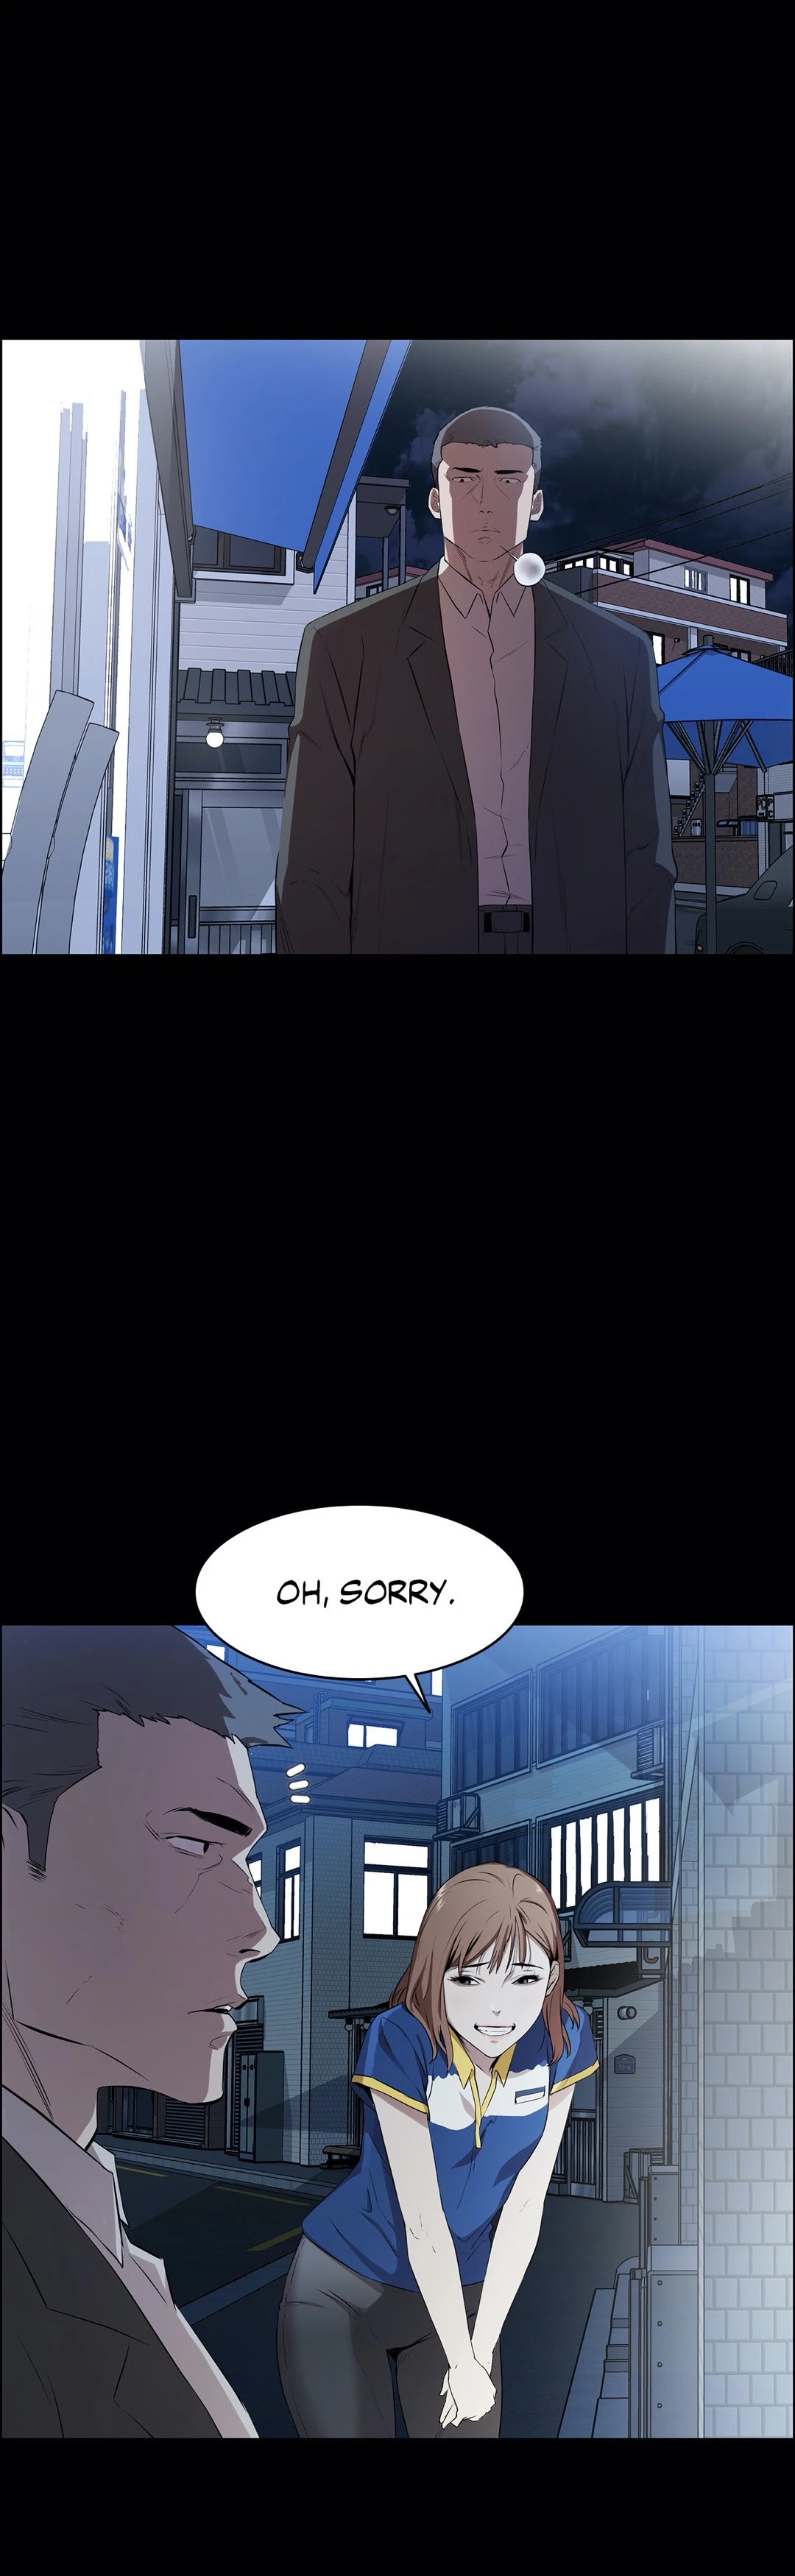 Thorns on Innocence - Chapter 1 Page 5